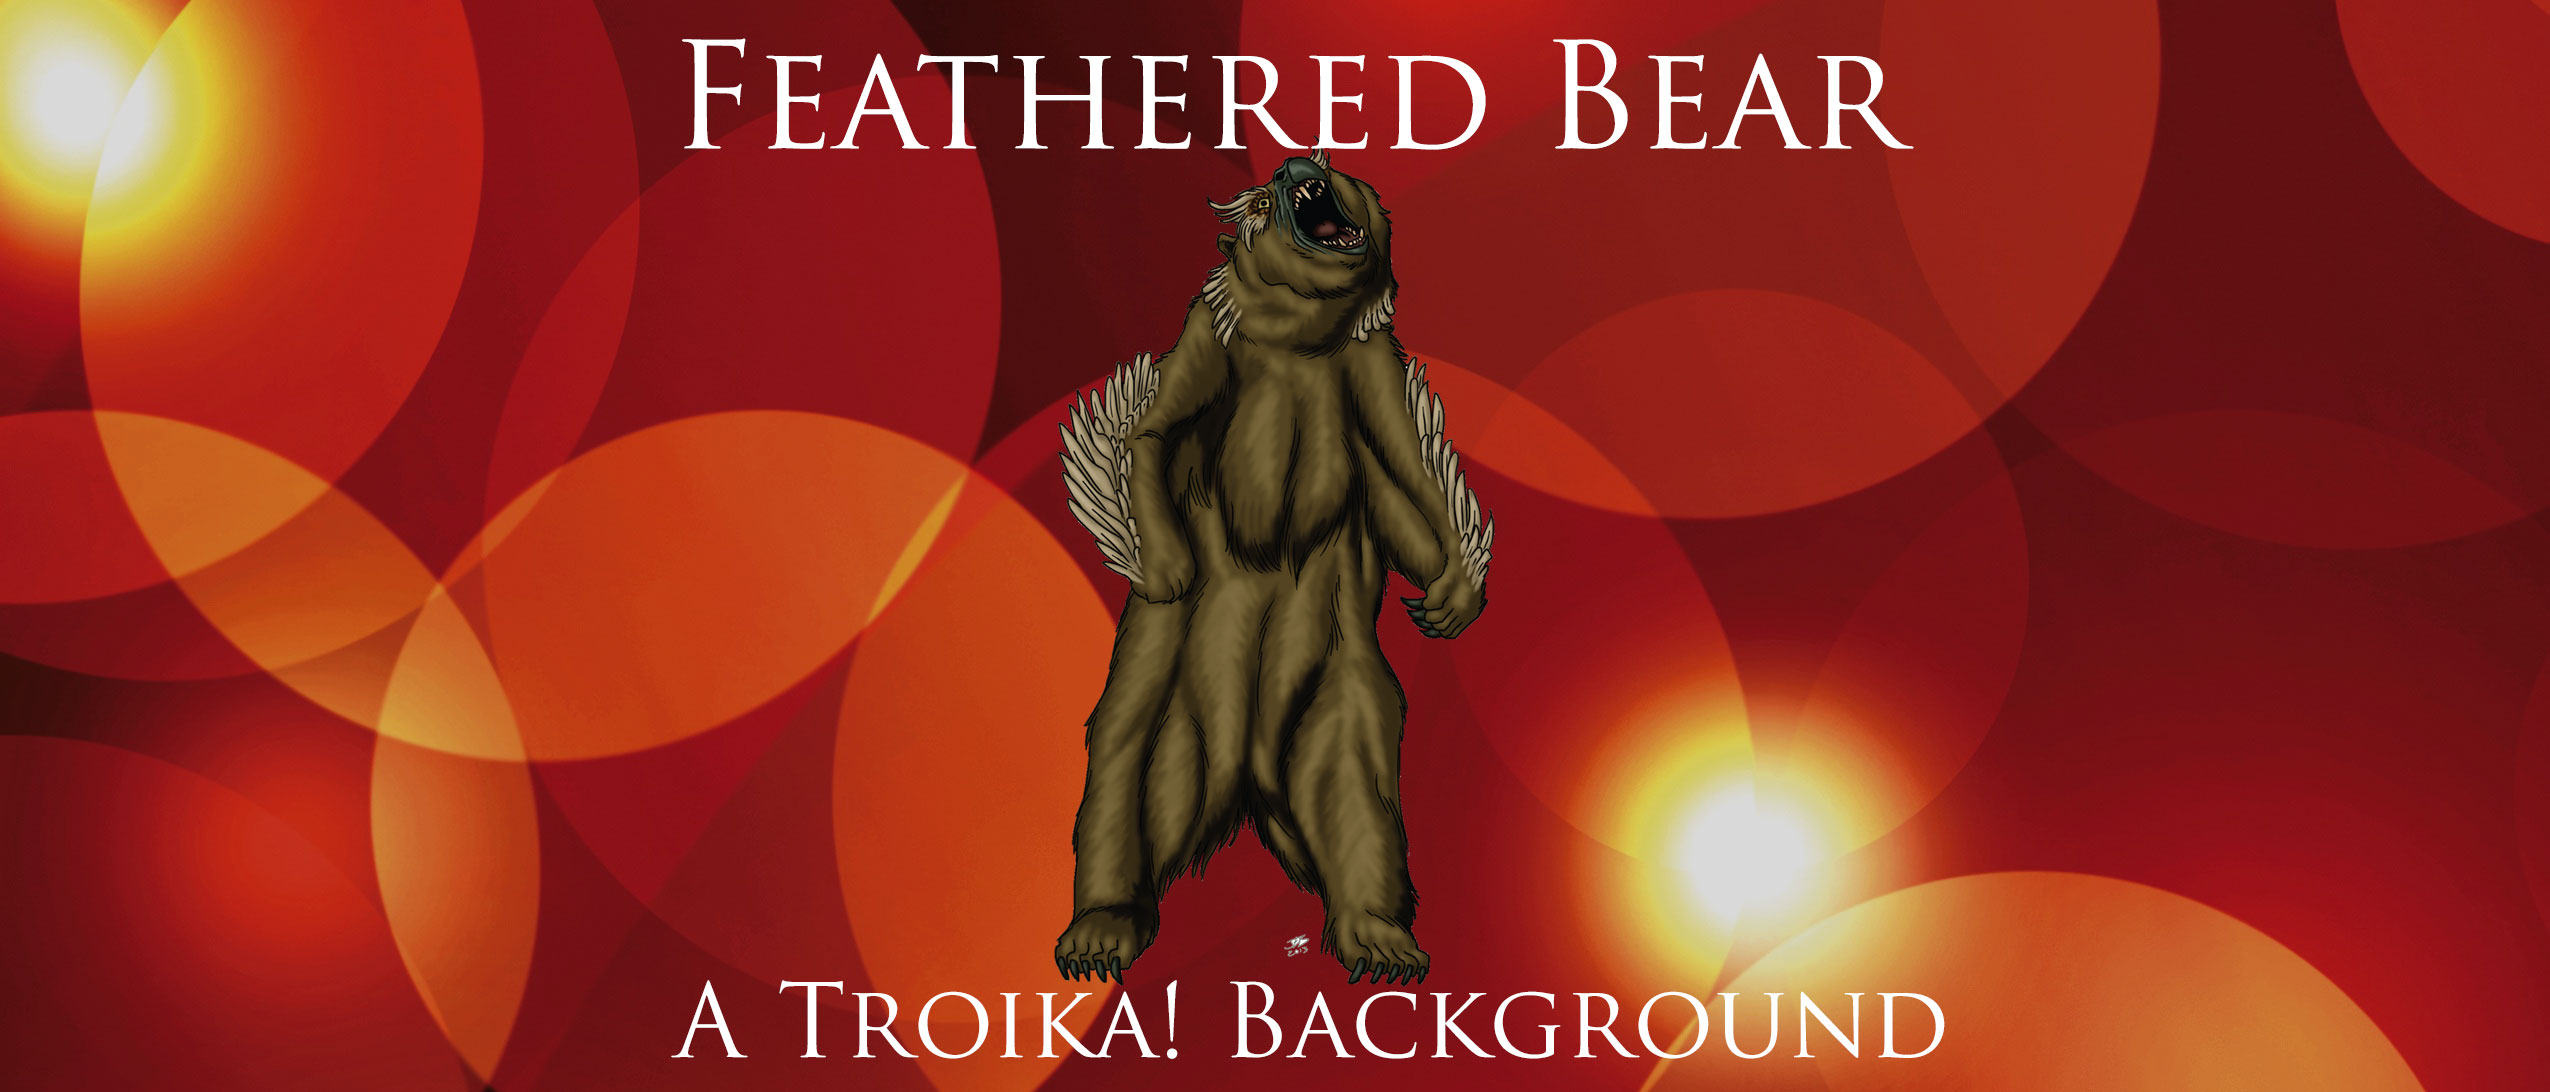 Feathered Bear - A Troika! Background